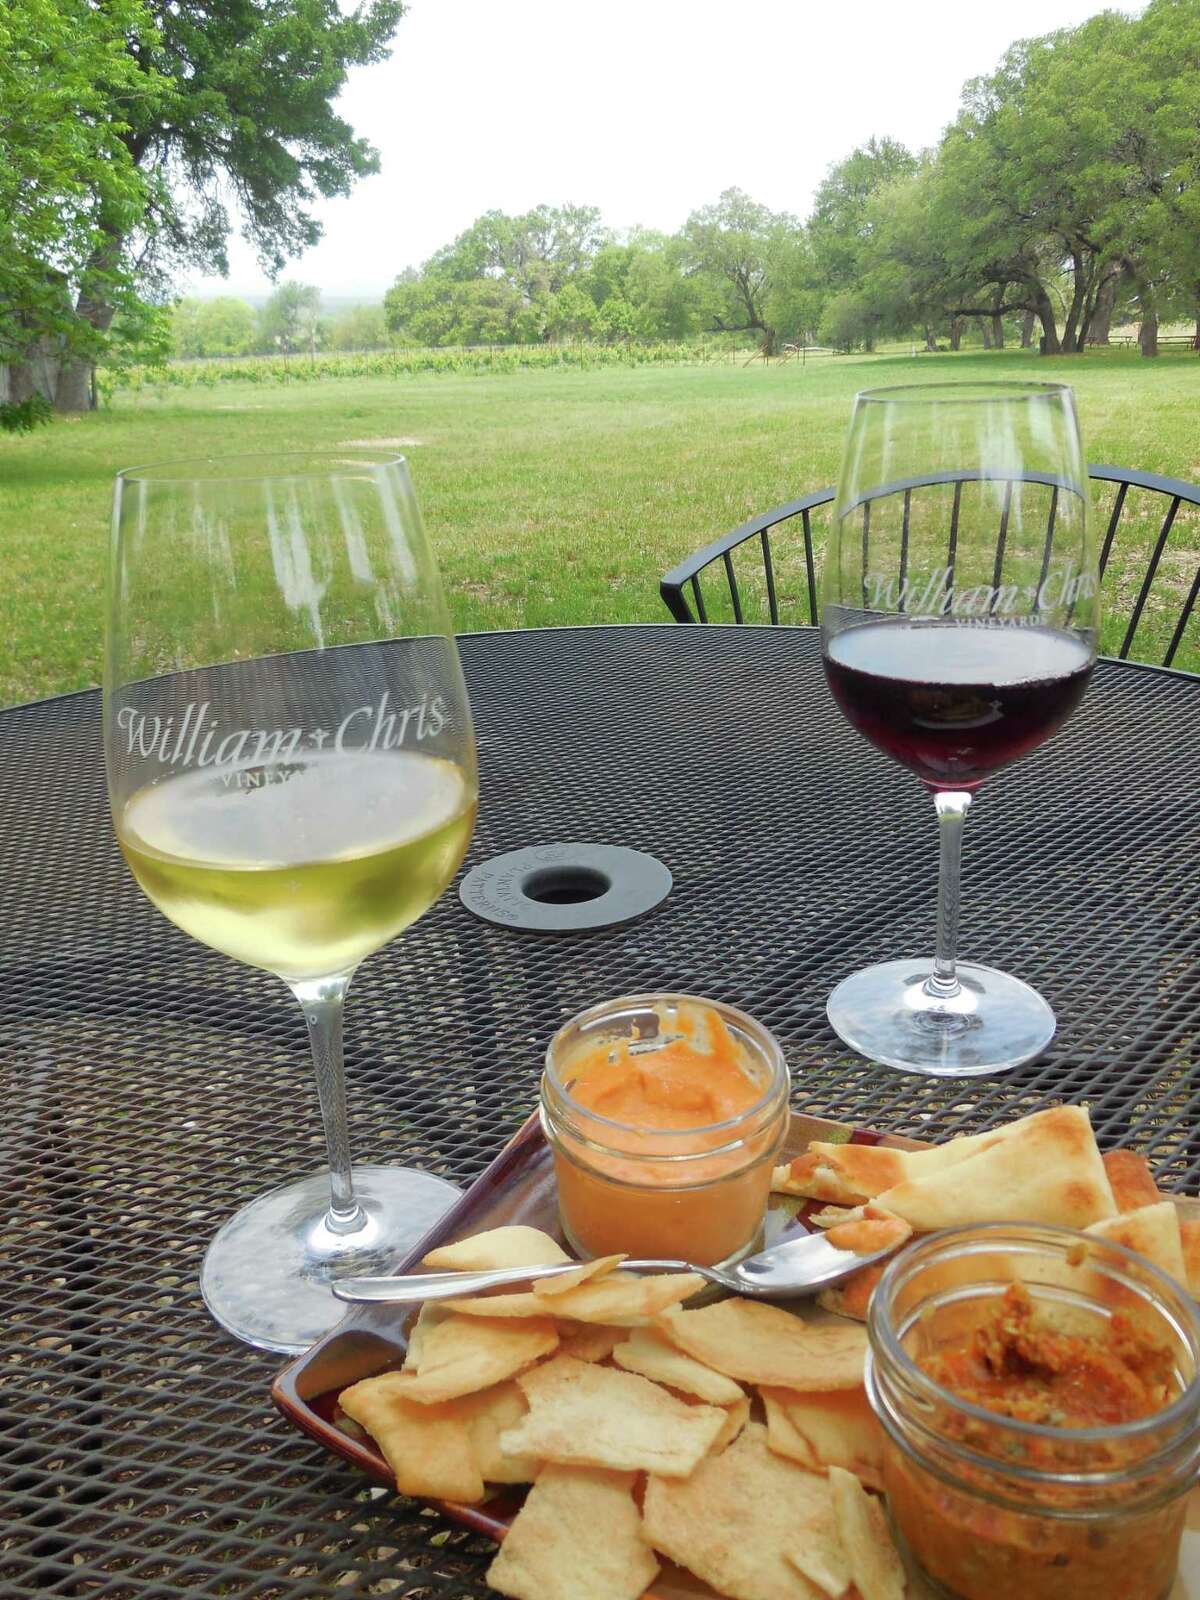 Tables on the lawn at William Chris Vineyards give guests a chance to enjoy snacks with wine from the Vineyards in Hye, on U.S. 290 between Johnson City and Fredericksburg.